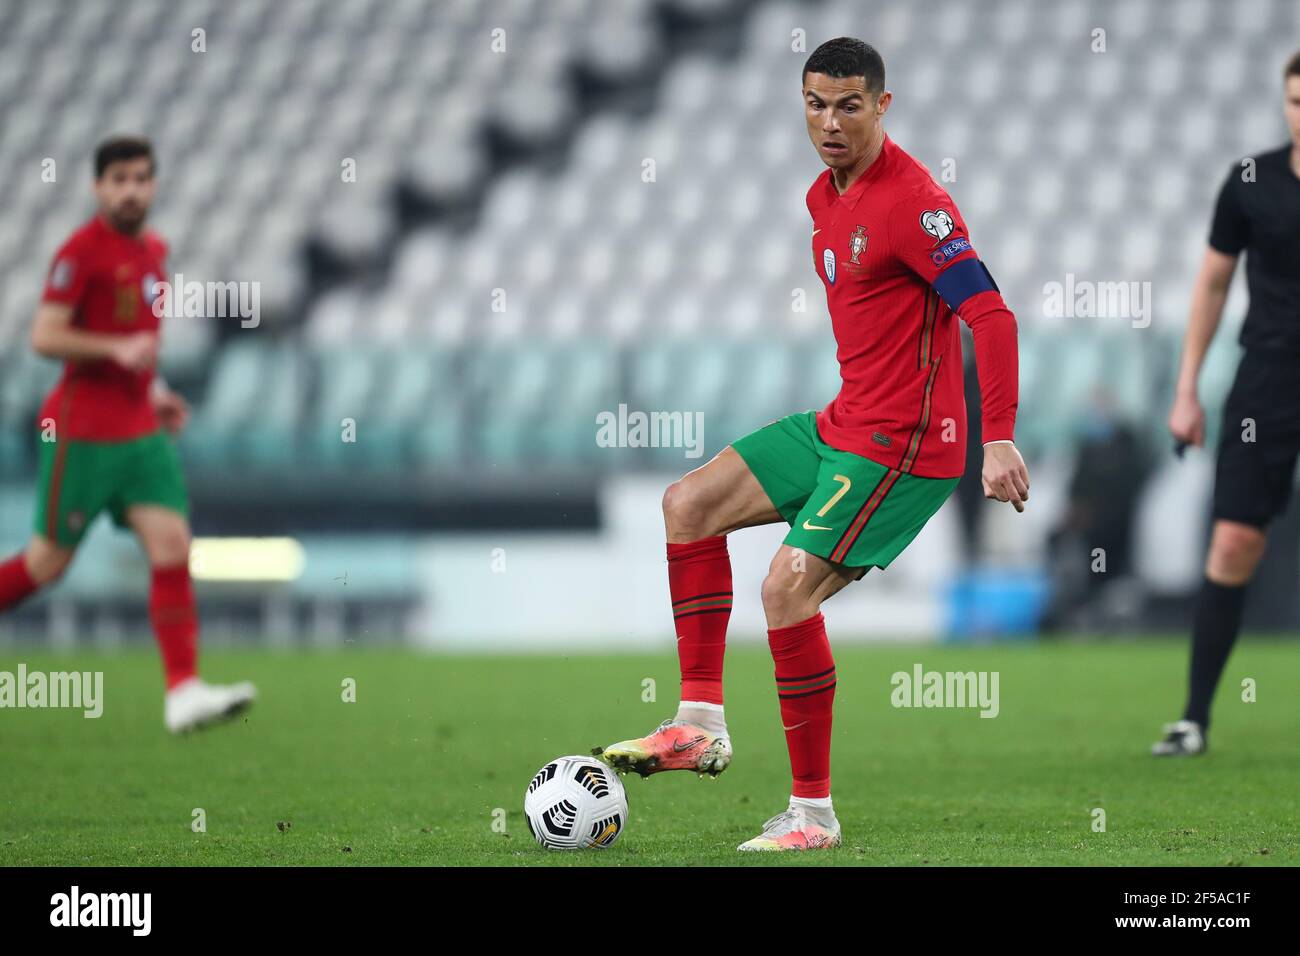 Cristiano Ronaldo of Portugal in action during the FIFA World Cup 2022 Qualifiers match between Portugal and Azerbaijan